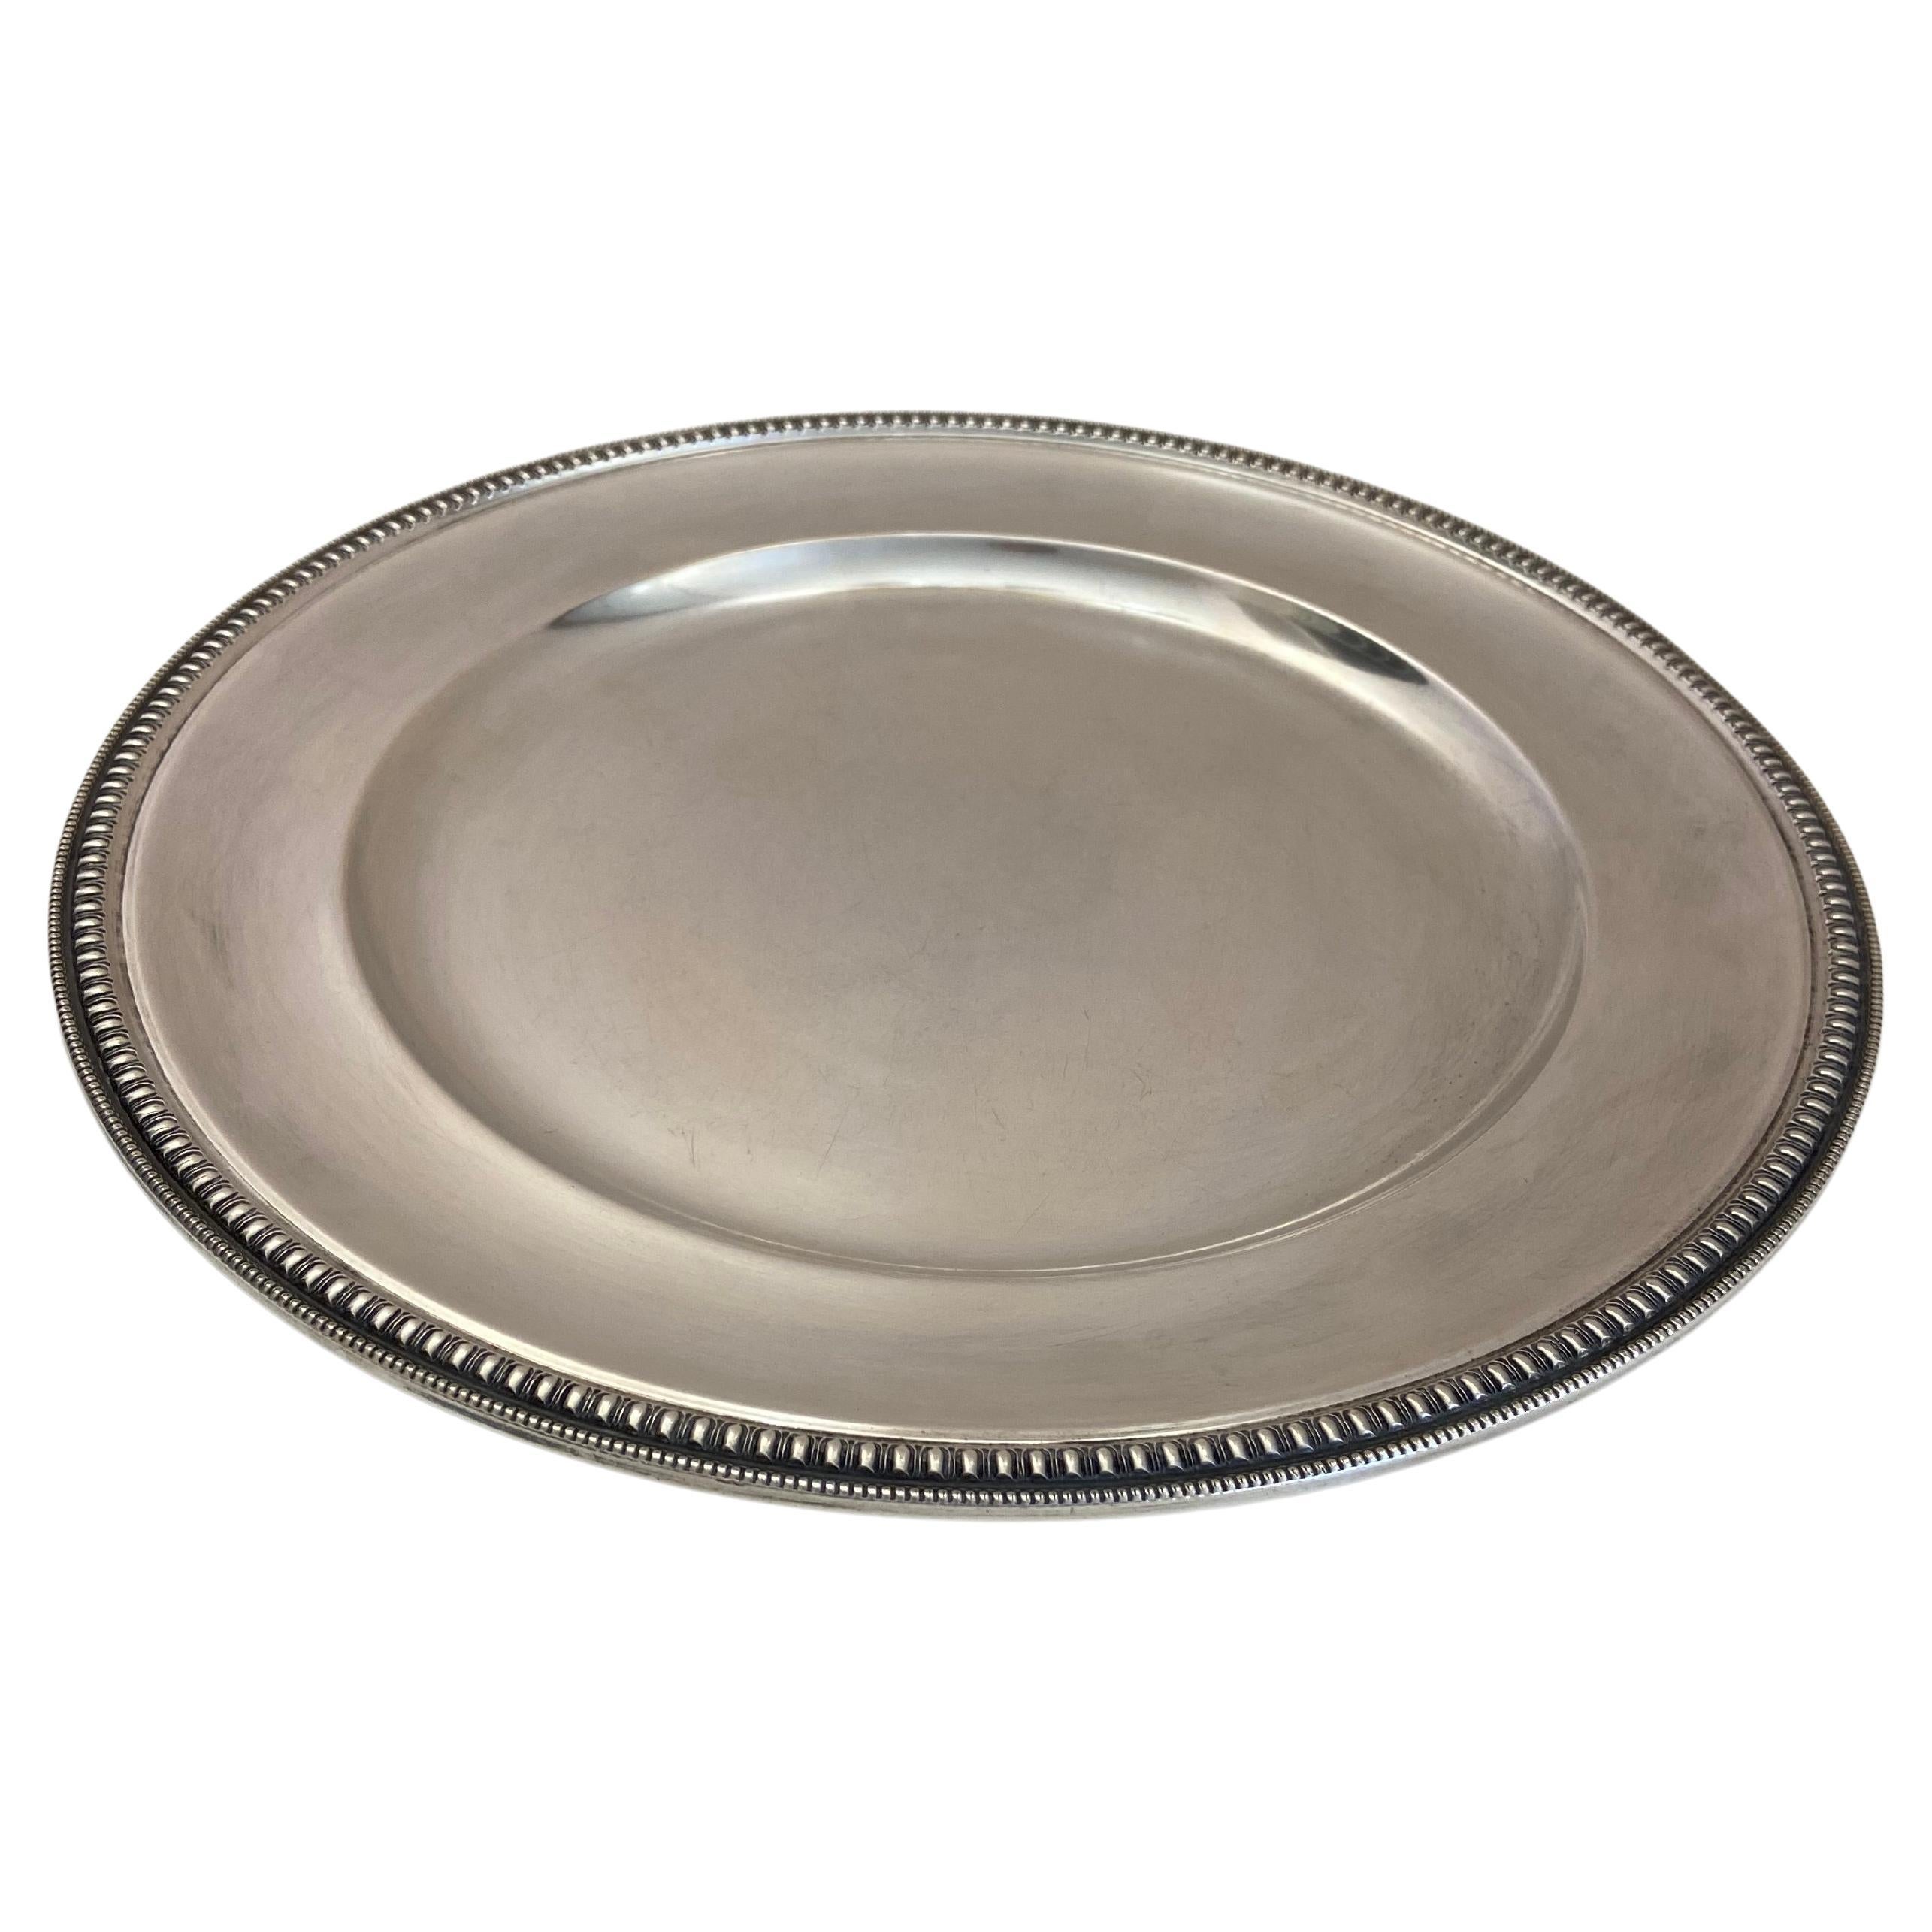 Service tray with ceramic rope handles 30 cms in diameter